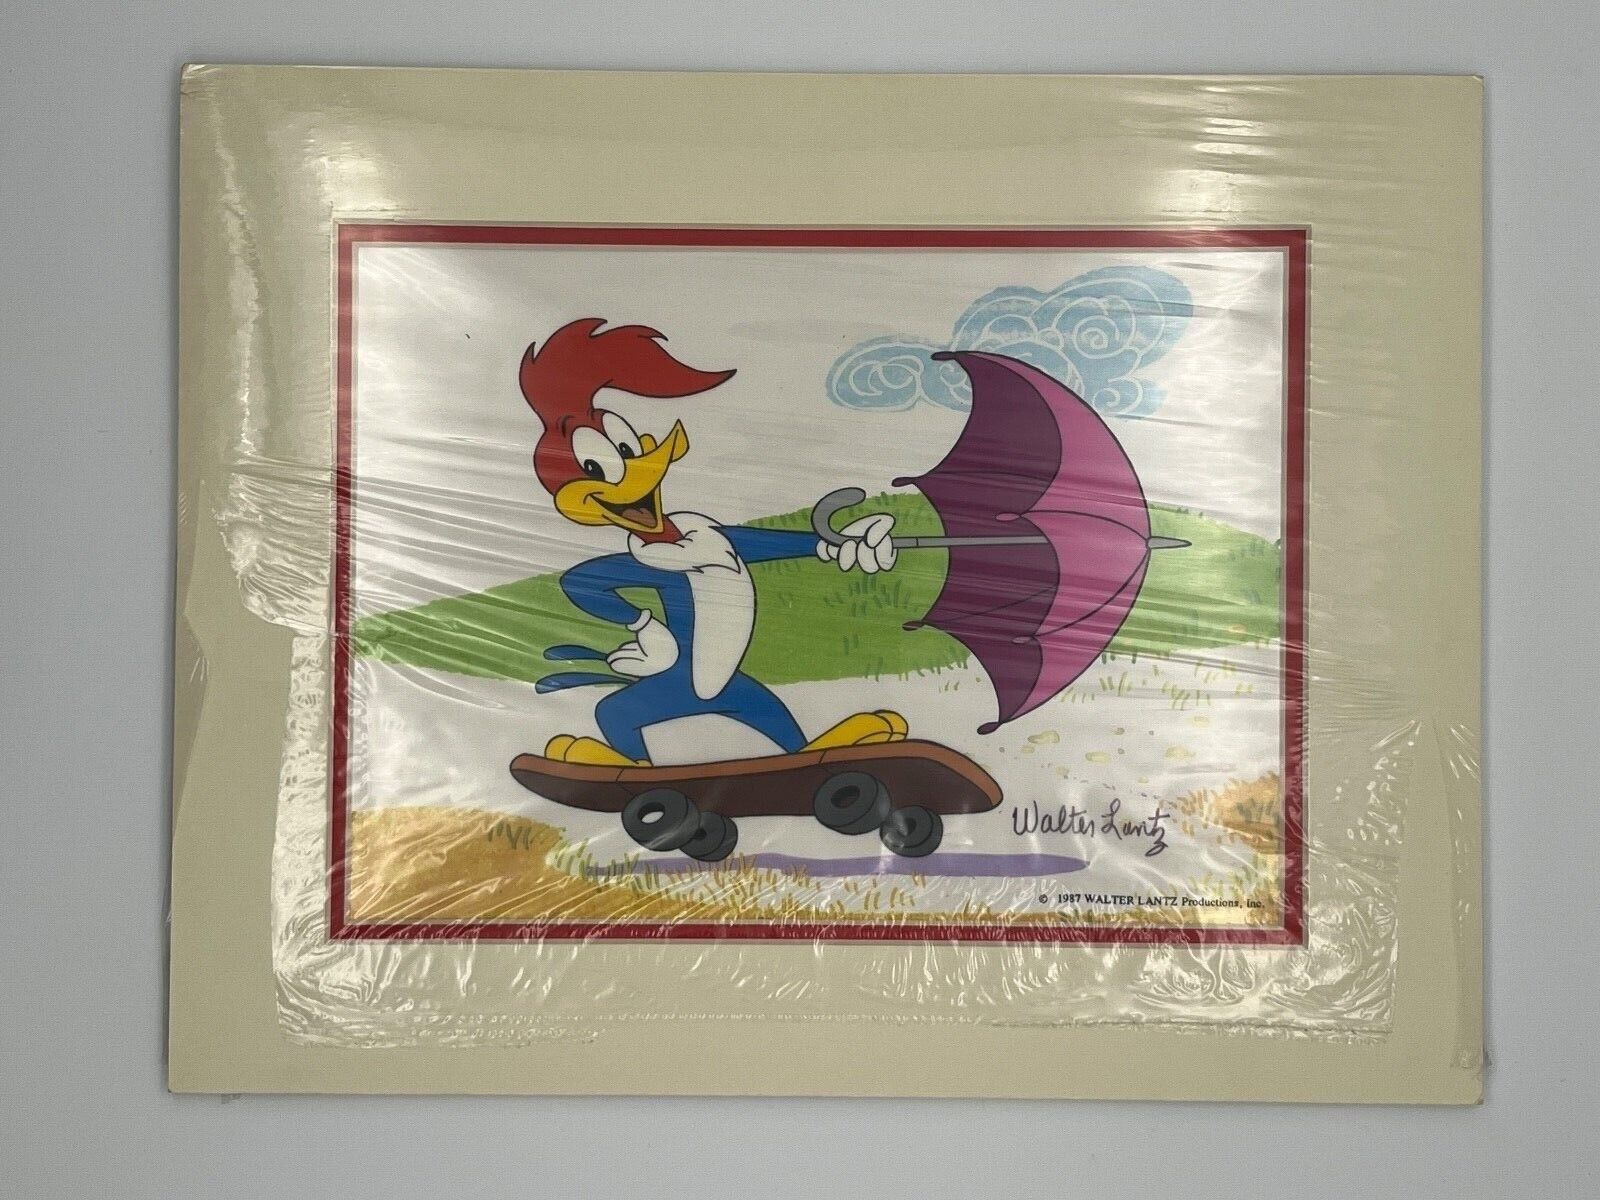 WOODY WOODPECKER ANIMATION CEL WIND POWER WALTER LANTZ SIGNED 1987 HAND PAINTED